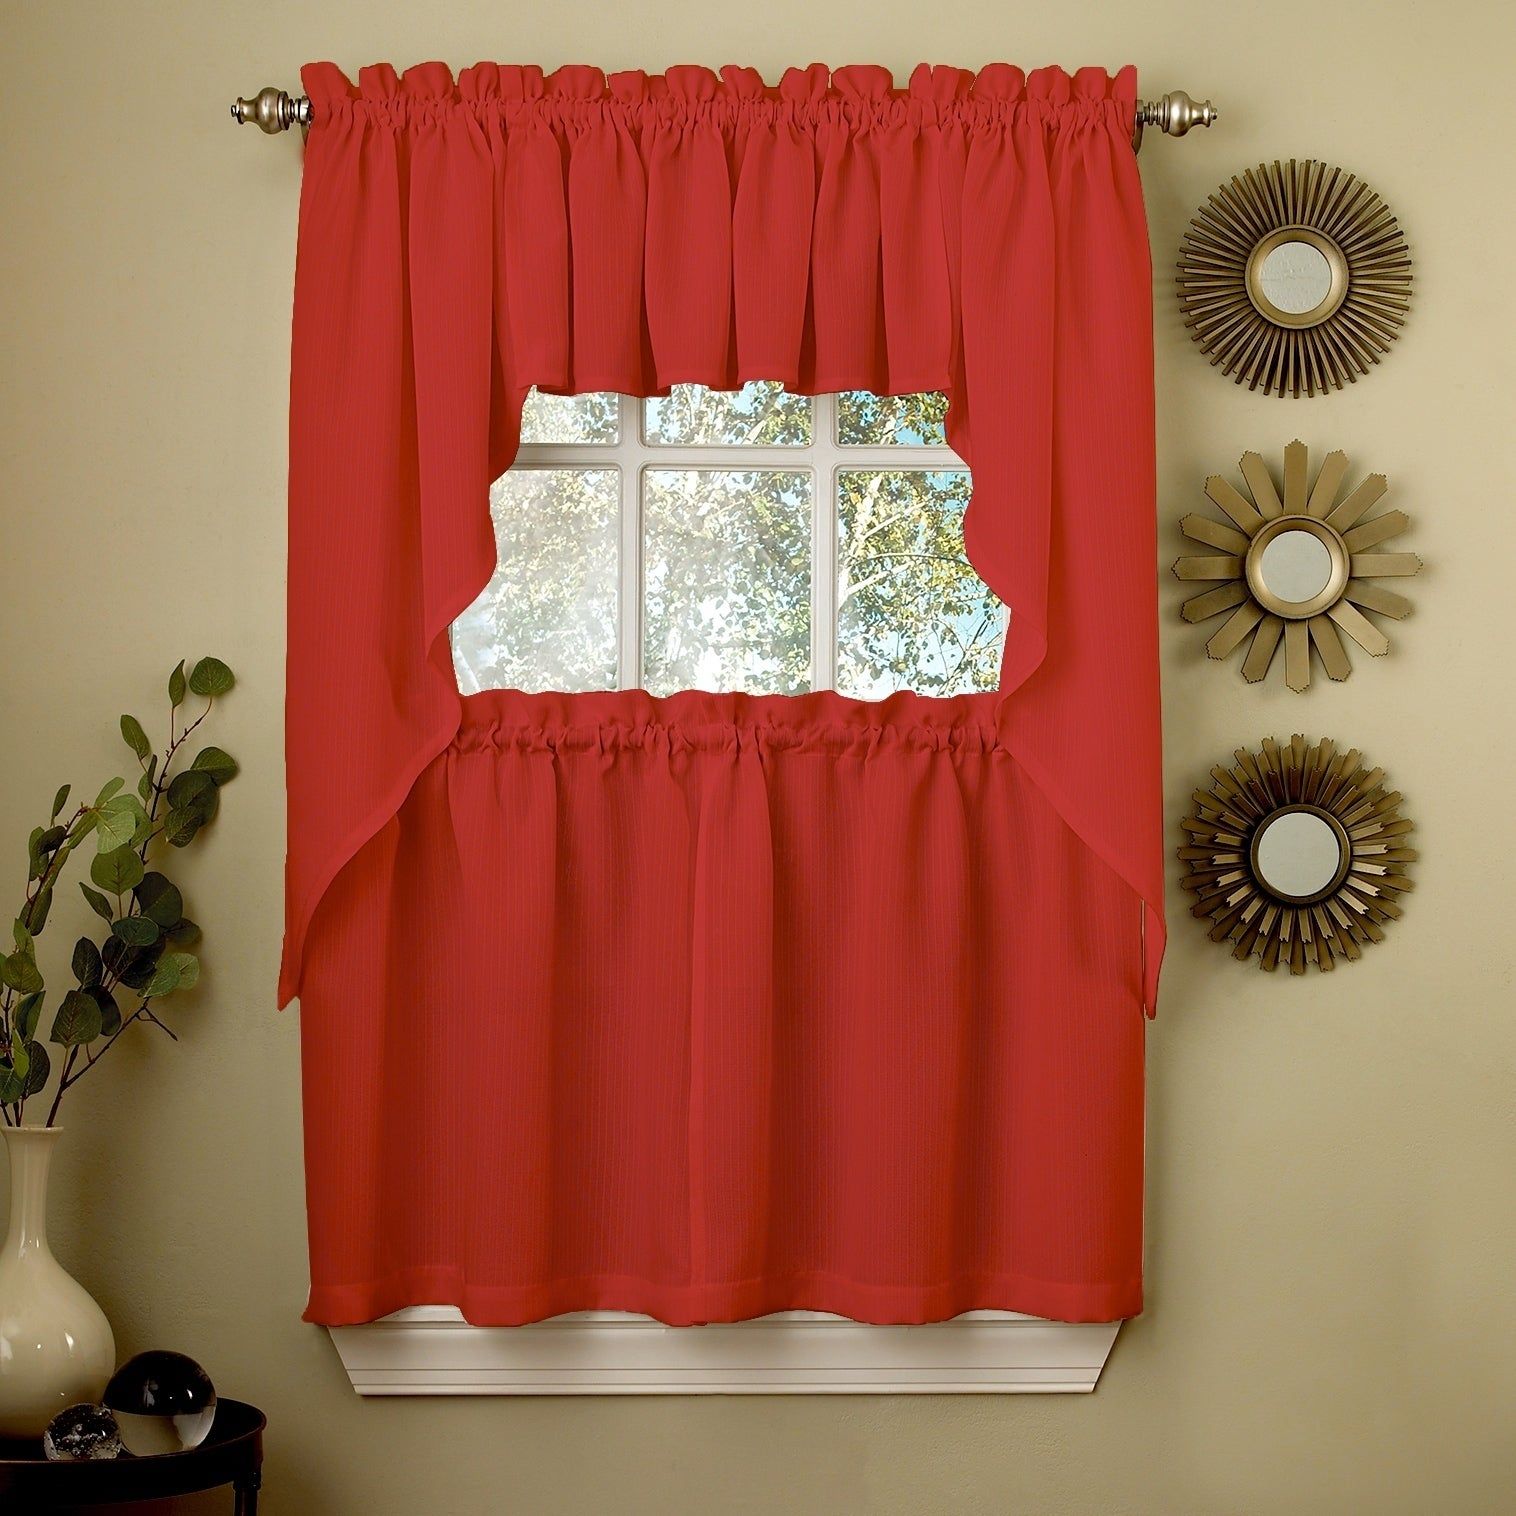 Opaque Red Ribcord Kitchen Curtain Pieces – Tiers/ Valances/ Swags Inside Red Delicious Apple 3 Piece Curtain Tiers (View 9 of 20)